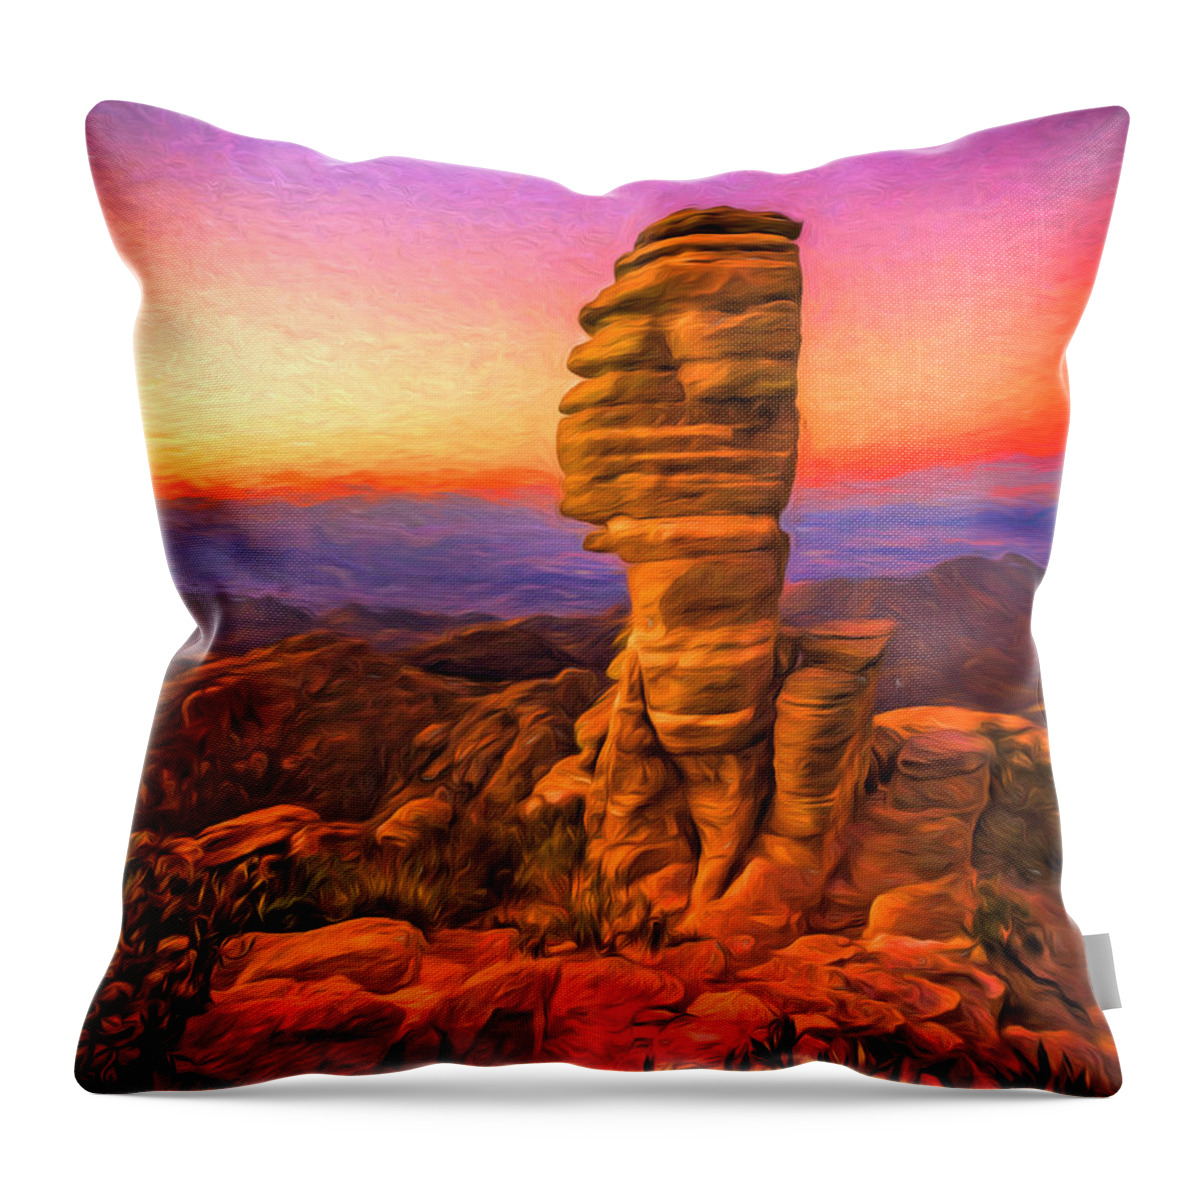 Landscape Throw Pillow featuring the photograph Mt. Lemmon Hoodoo Artistic by Chris Bordeleau